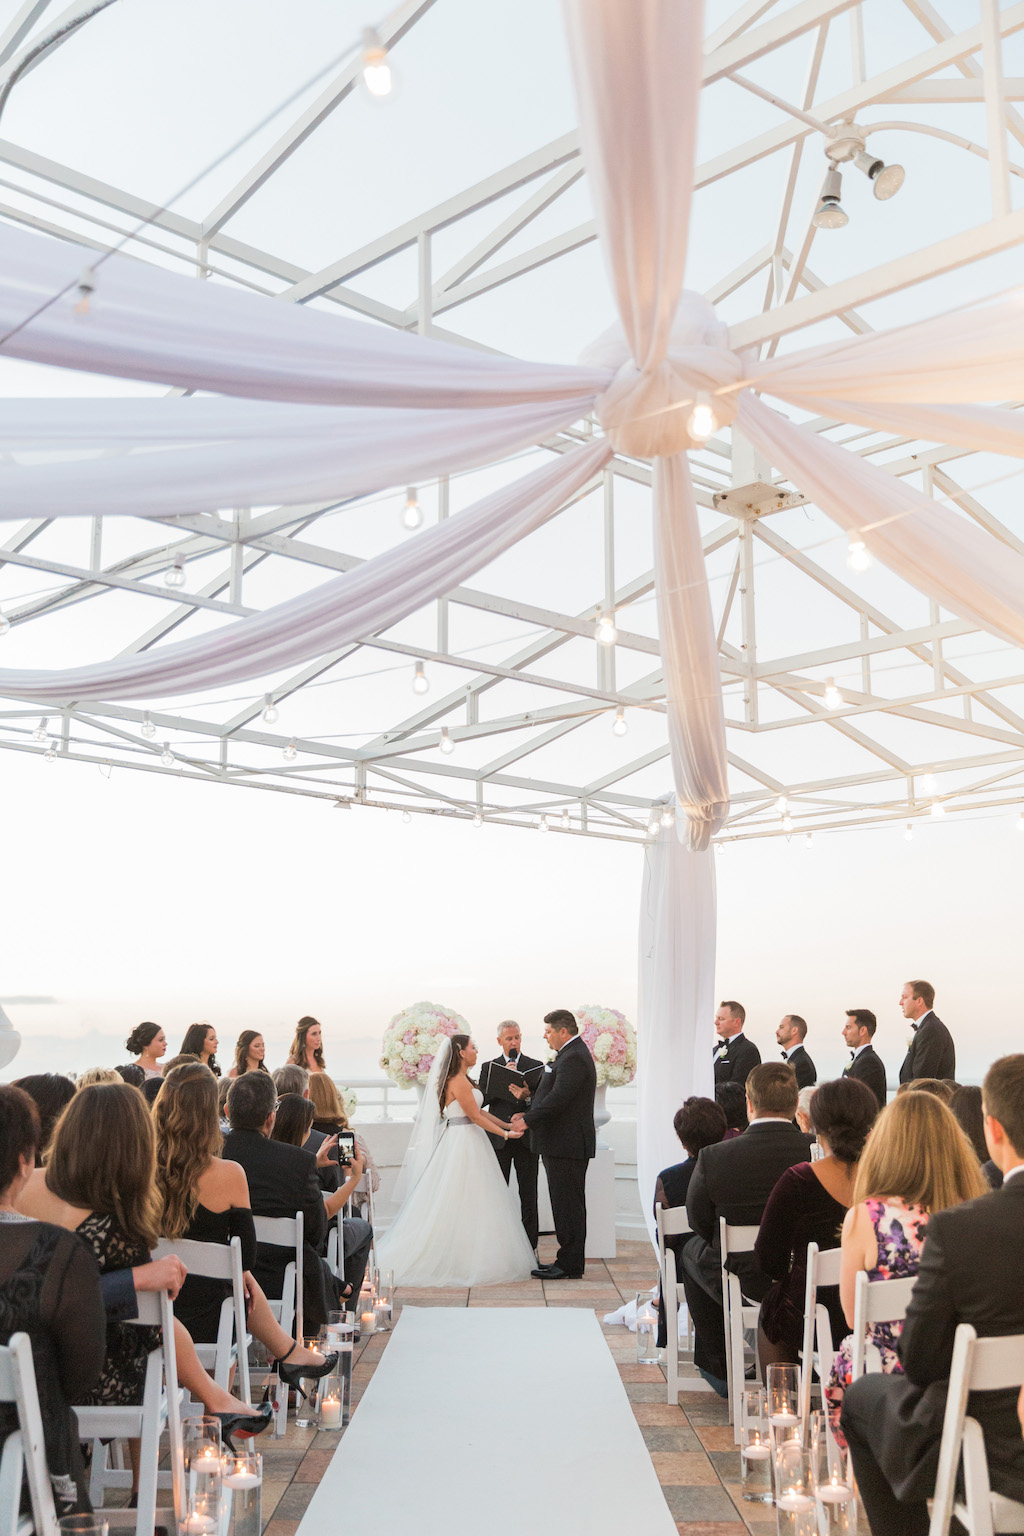 St. Pete Beach Wedding Ceremony Portrait with White Folding Chairs, Glass Cylinders with Floating Candles, White Runner and White Draping | St. Pete Beach Wedding Venue The Don Cesar